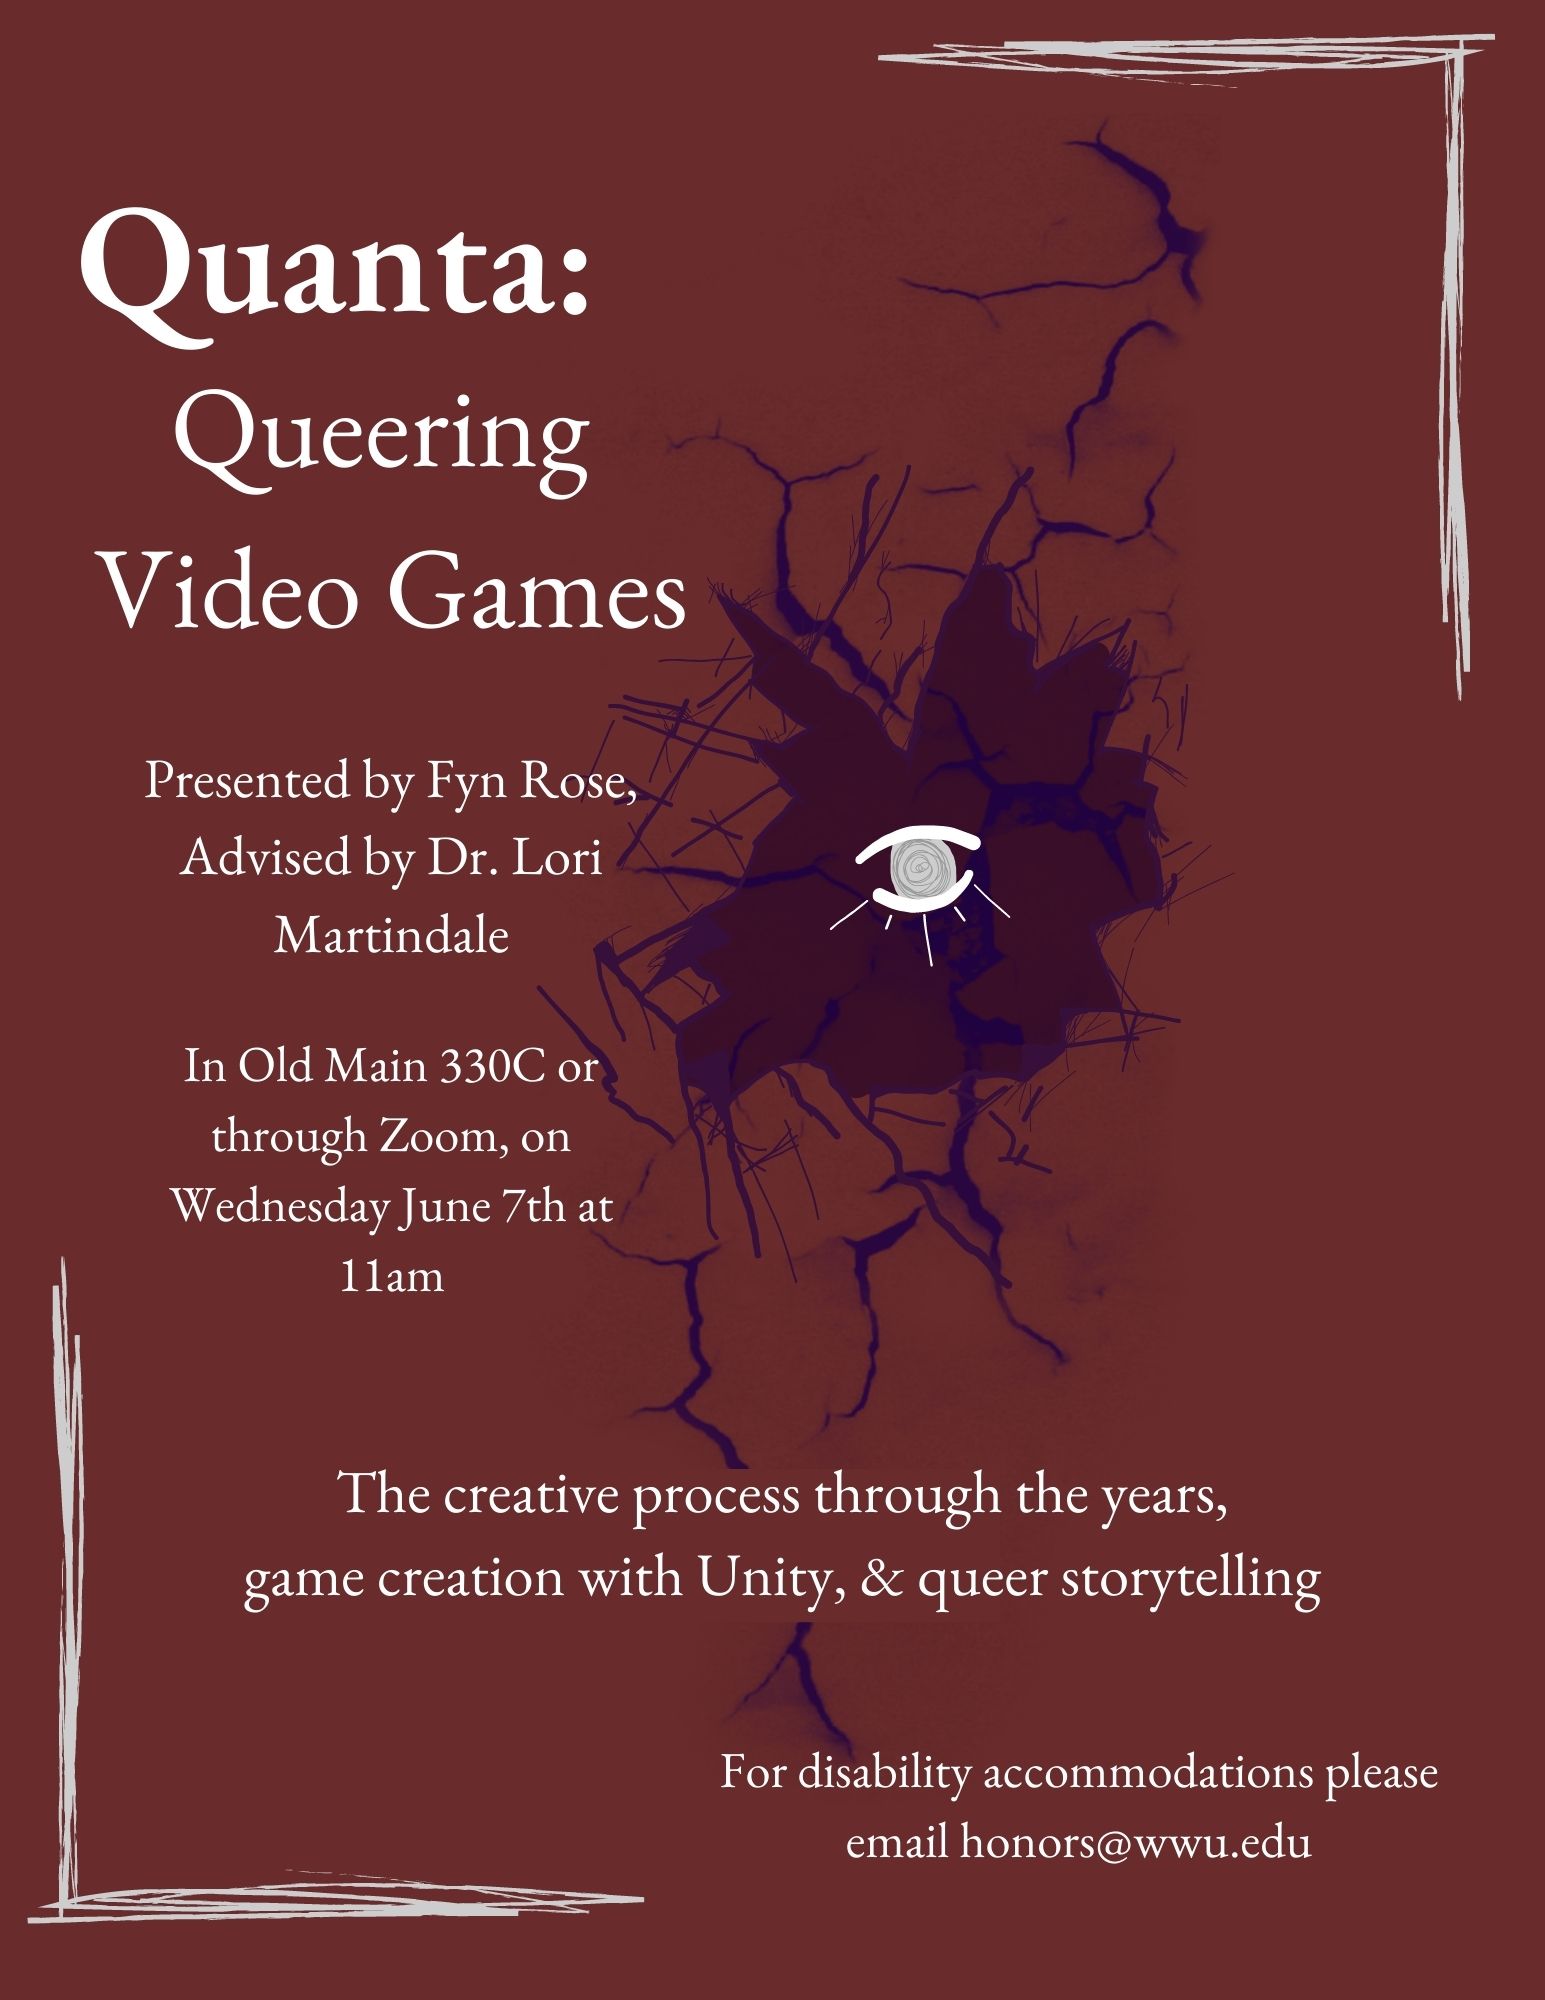 Maroon background with a purple hole modeled after broken glass with a drawn eye inside of the center. White sketched lines border two of the outer corners. Text reads: "Quanta: Queering Video Games. Presented by Fyn Rose, Advised by Dr. Lori Martindale. In Old Main 330C or through Zoom, on Wednesday June 7th at 11am. The creative process through the years, game creation with Unity, and queer storytelling. For disability accommodations please email honors@wwu.edu."